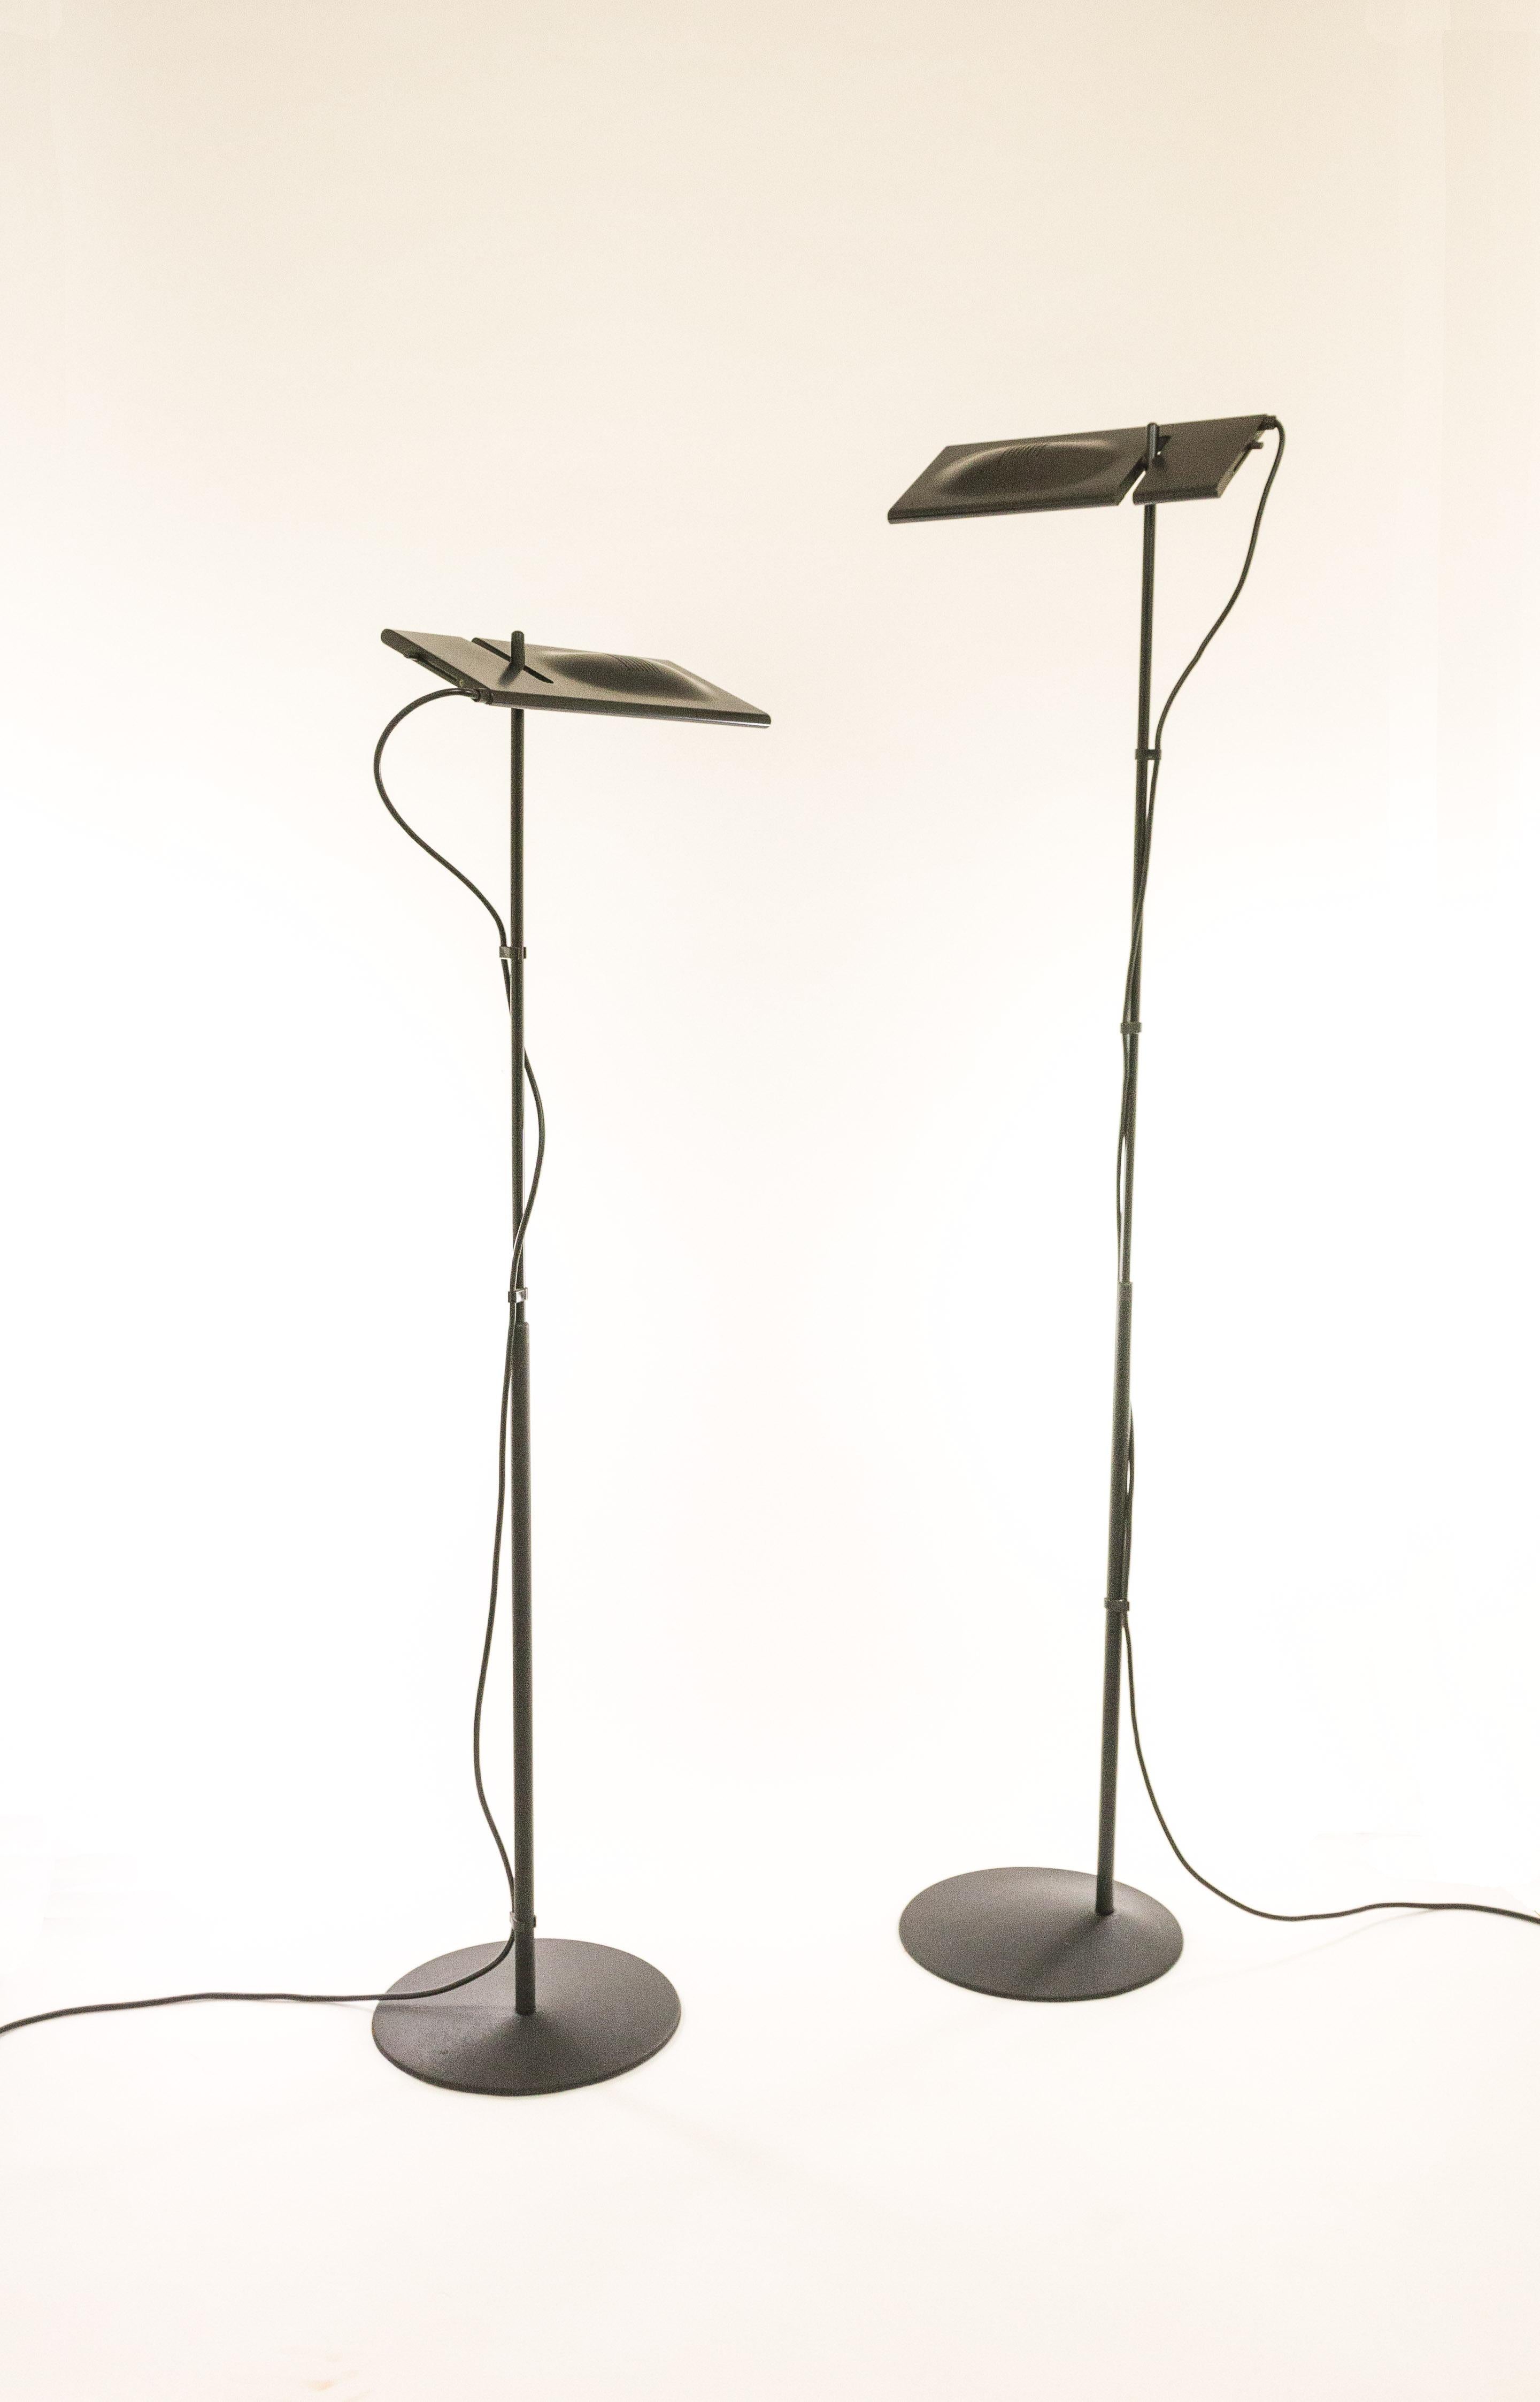 Modern Set of Duna Floor Lamps by Mario Barbaglia & MarCo Colombo for Paf Studio, 1980s For Sale